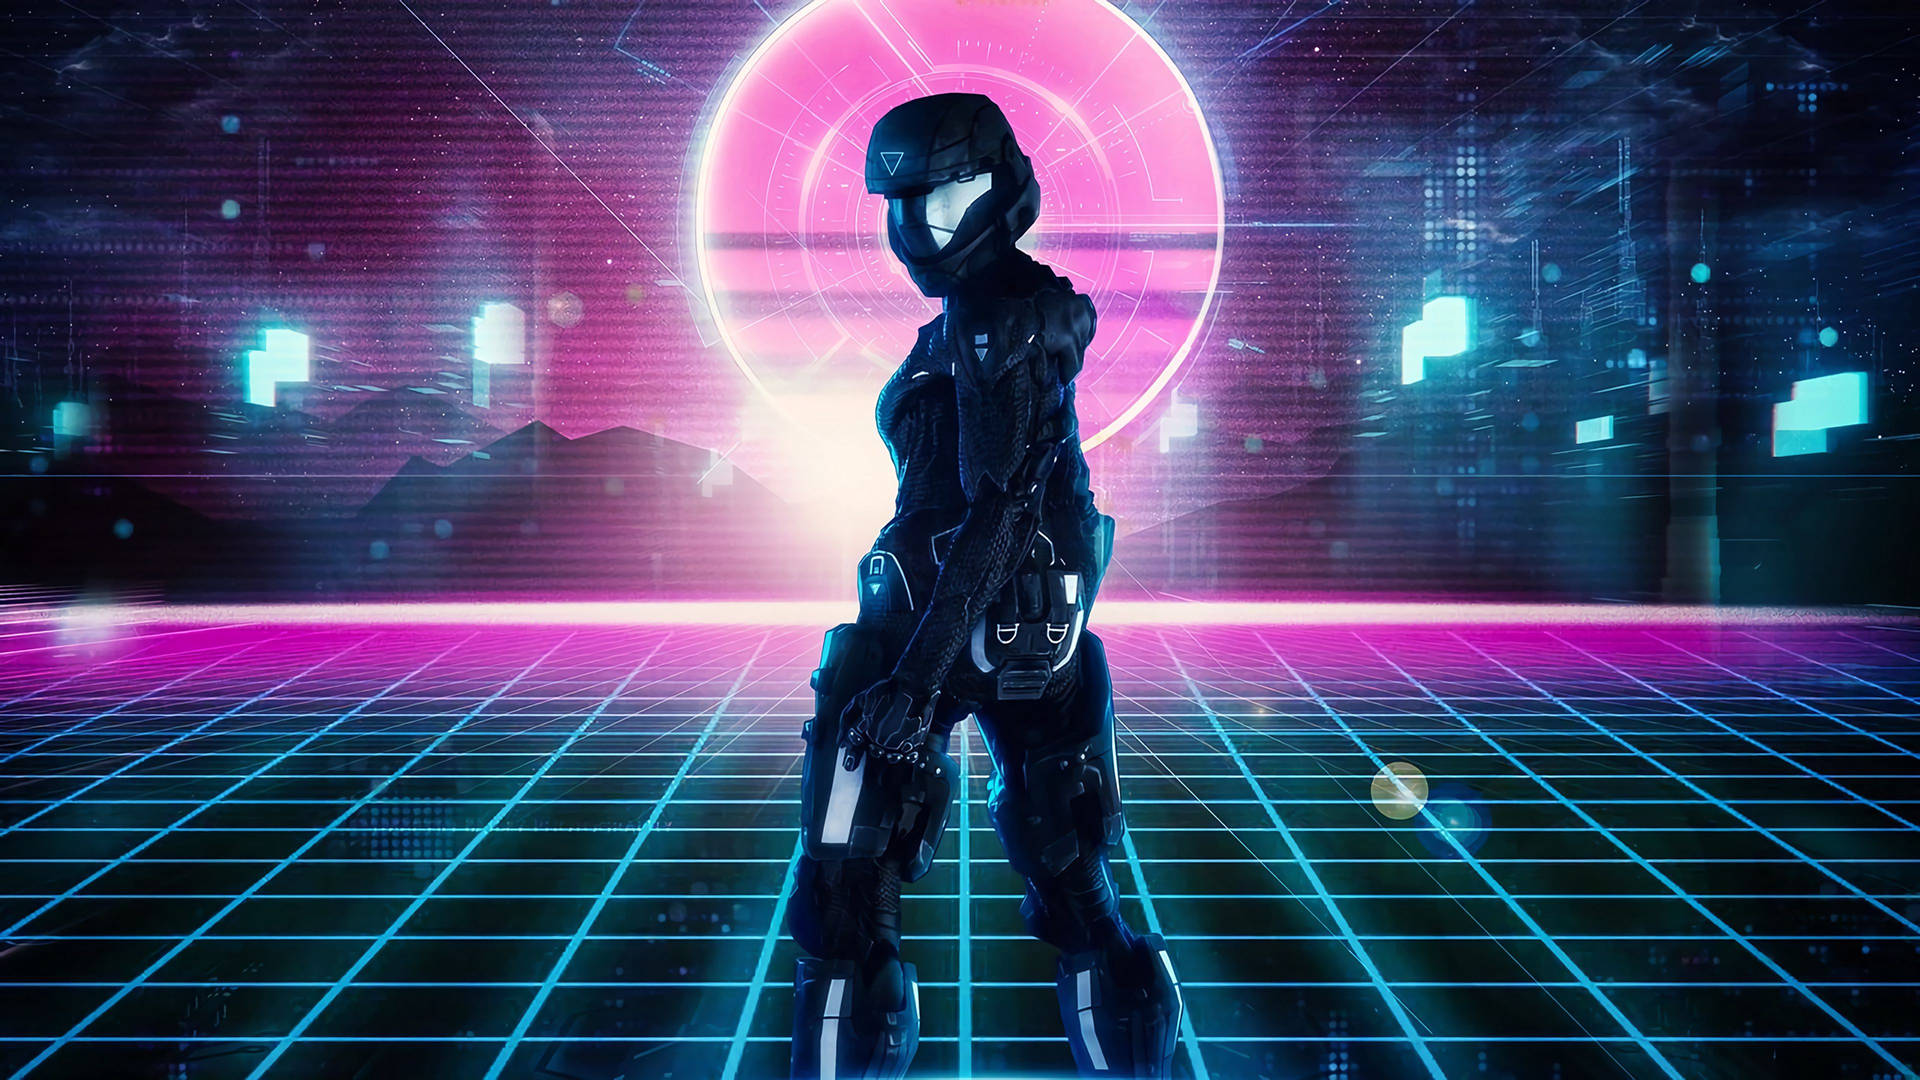 Aesthetic Armored Science-fictional Warrior In Cyberpunk Background